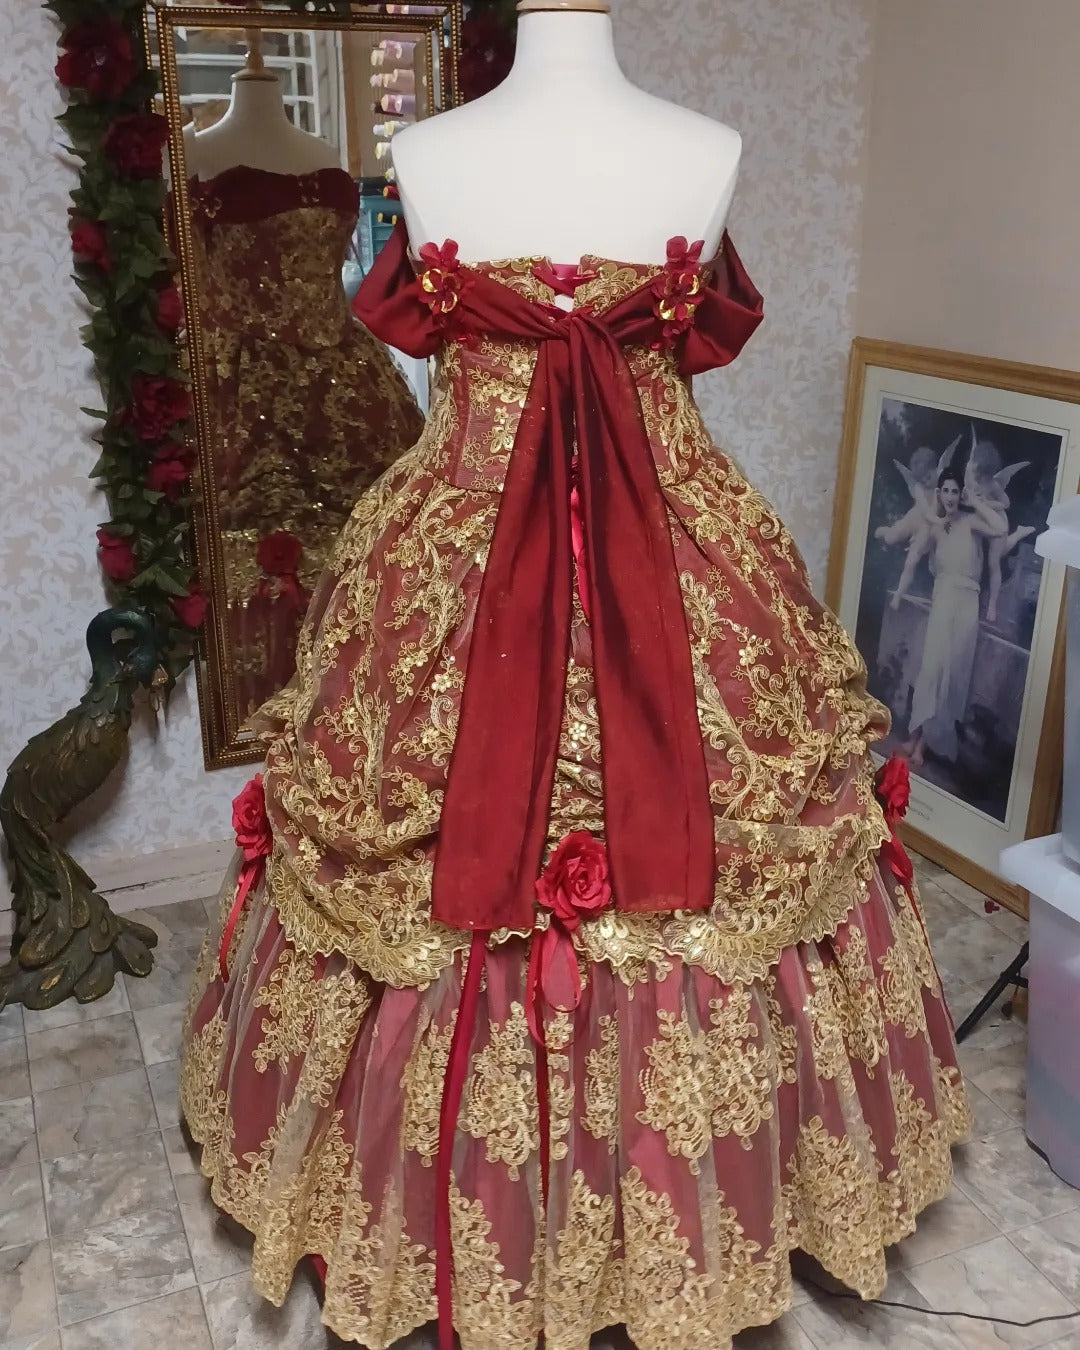 Red/Gold Belle Fantasy Gown with Flowers In-Stock!  Plus Size